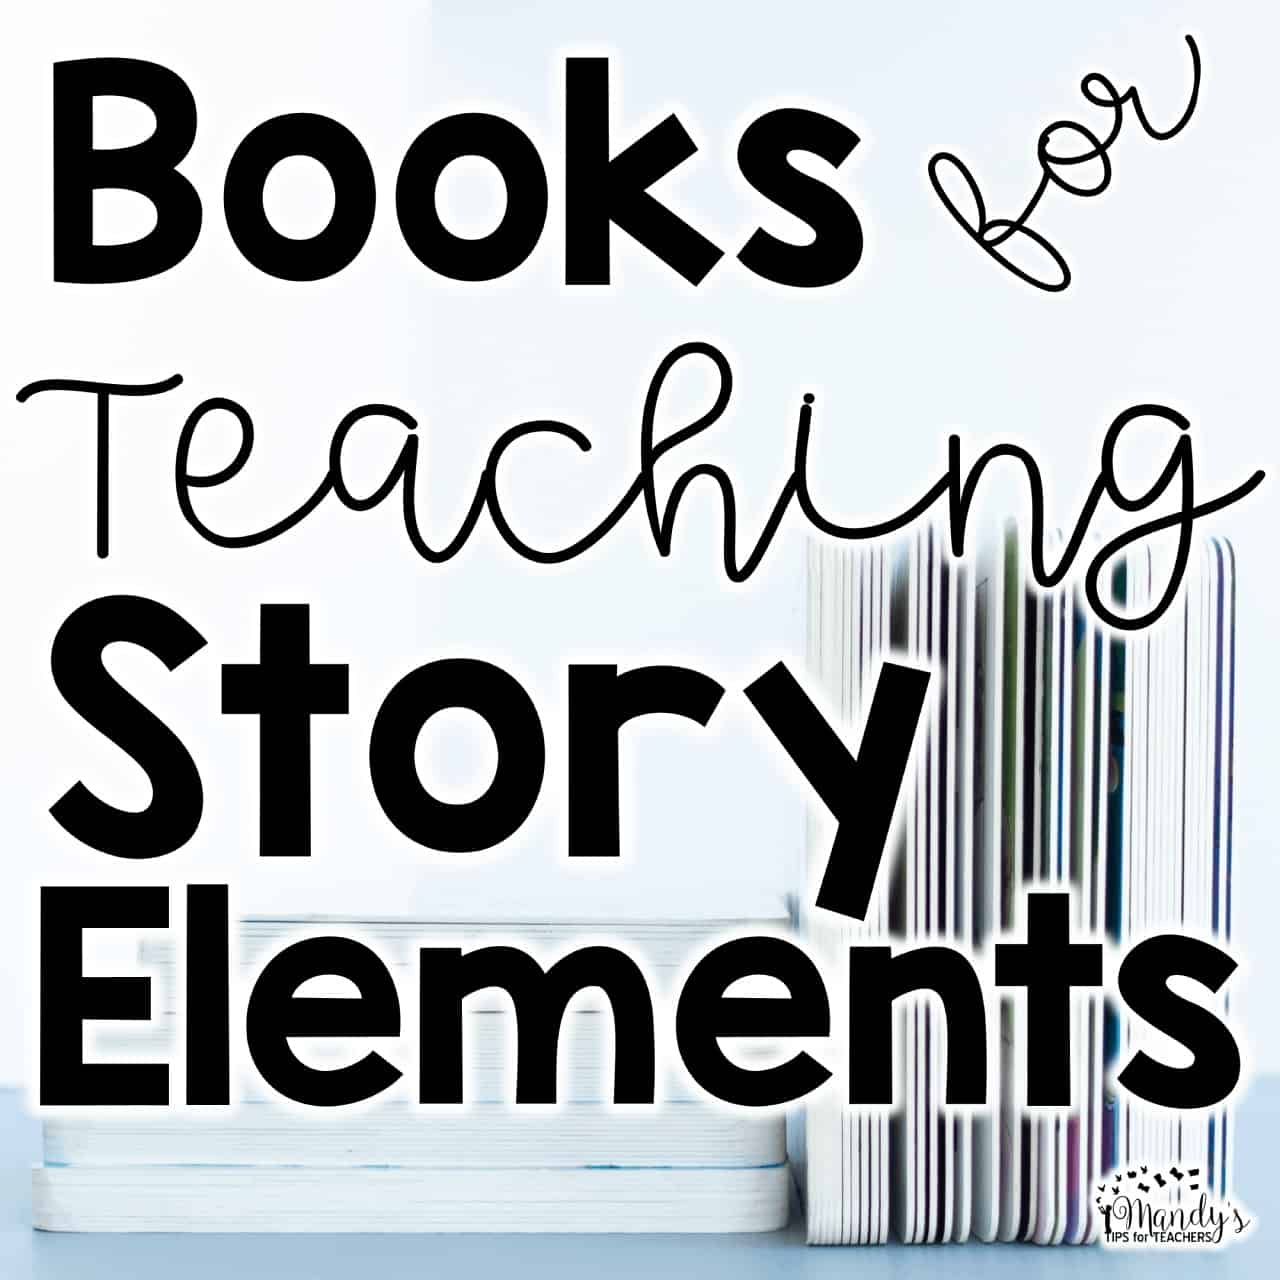 Books for Teaching Story Elements